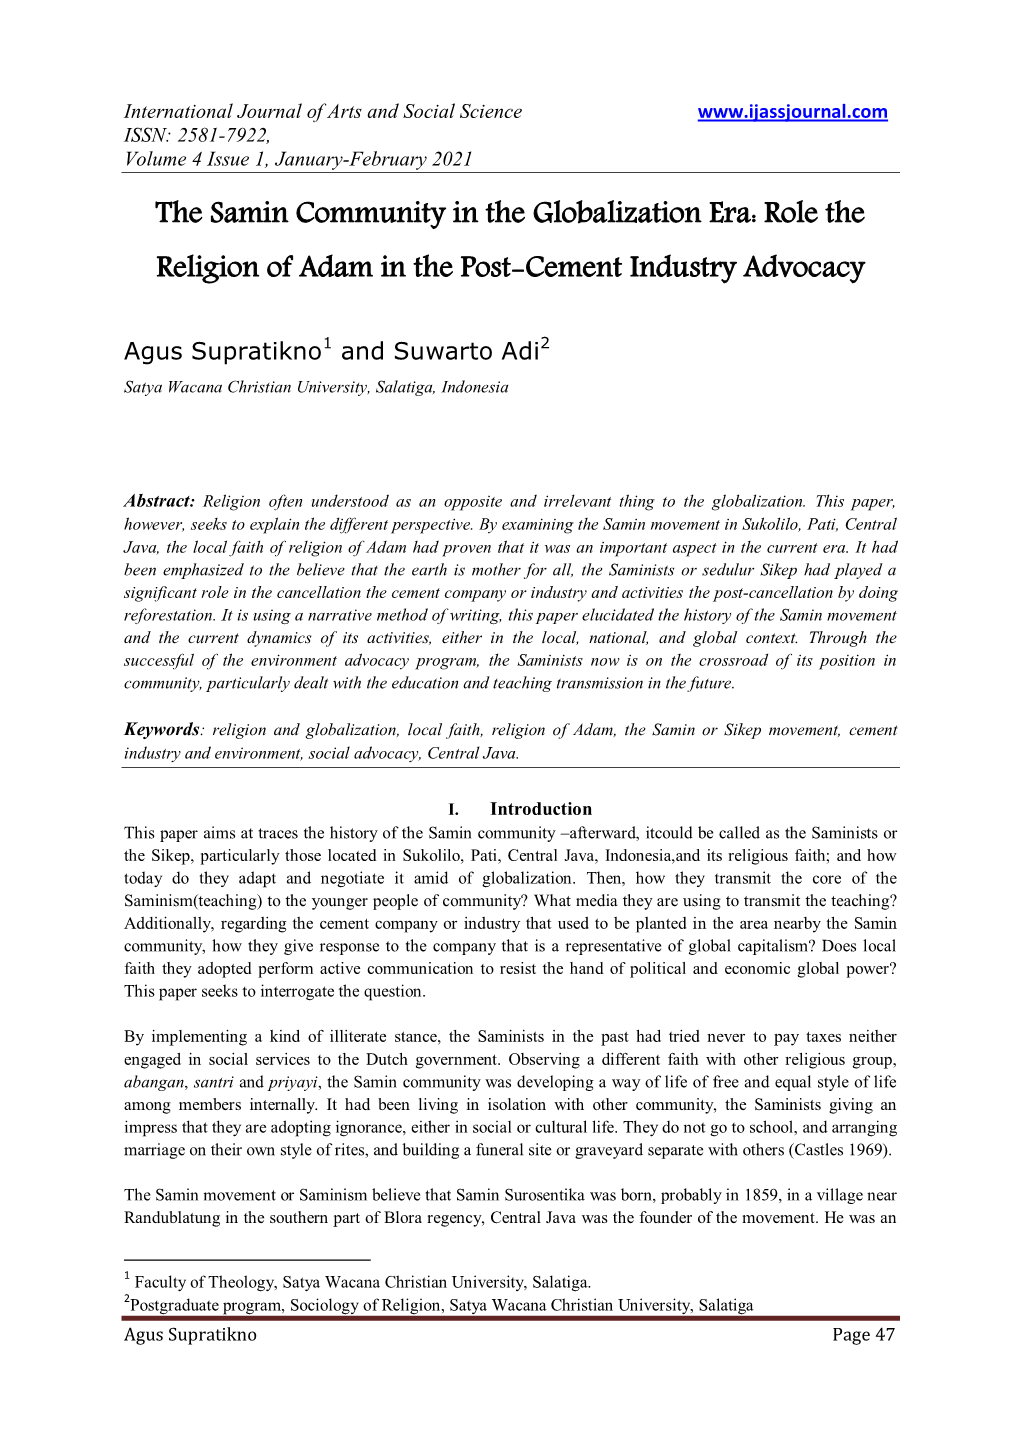 The Samin Community in the Globalization Era: Role the Religion of Adam in the Post-Cement Industry Advocacy